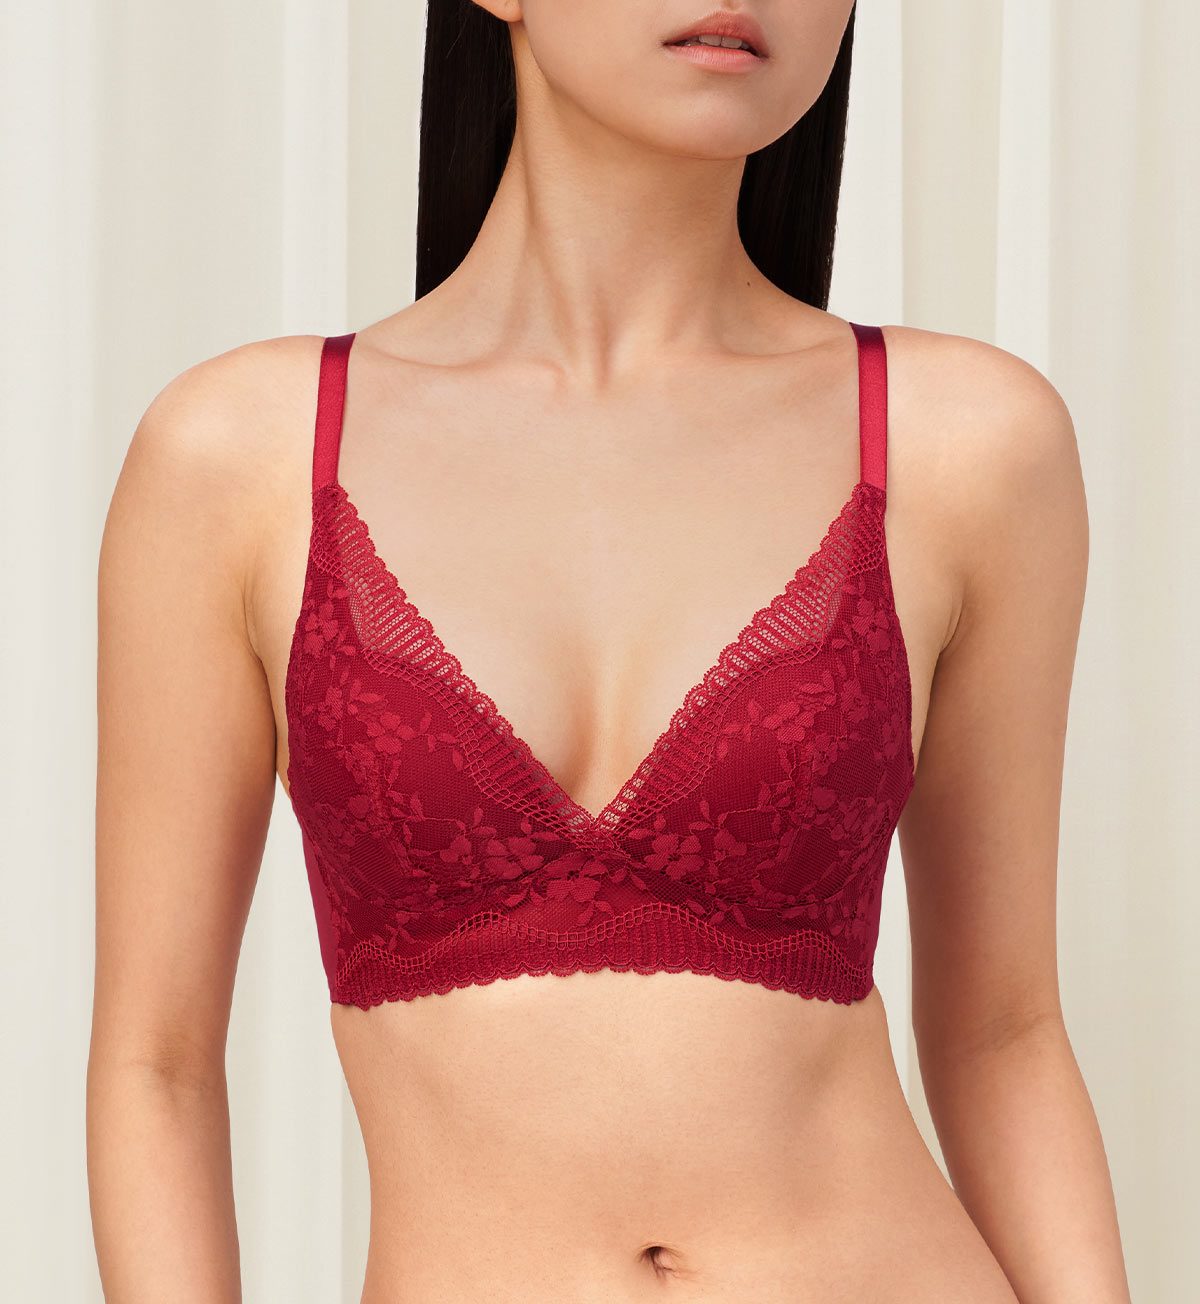 Aqua Fresh Non-Wired Deep V Push Up Bra in Paprika Red